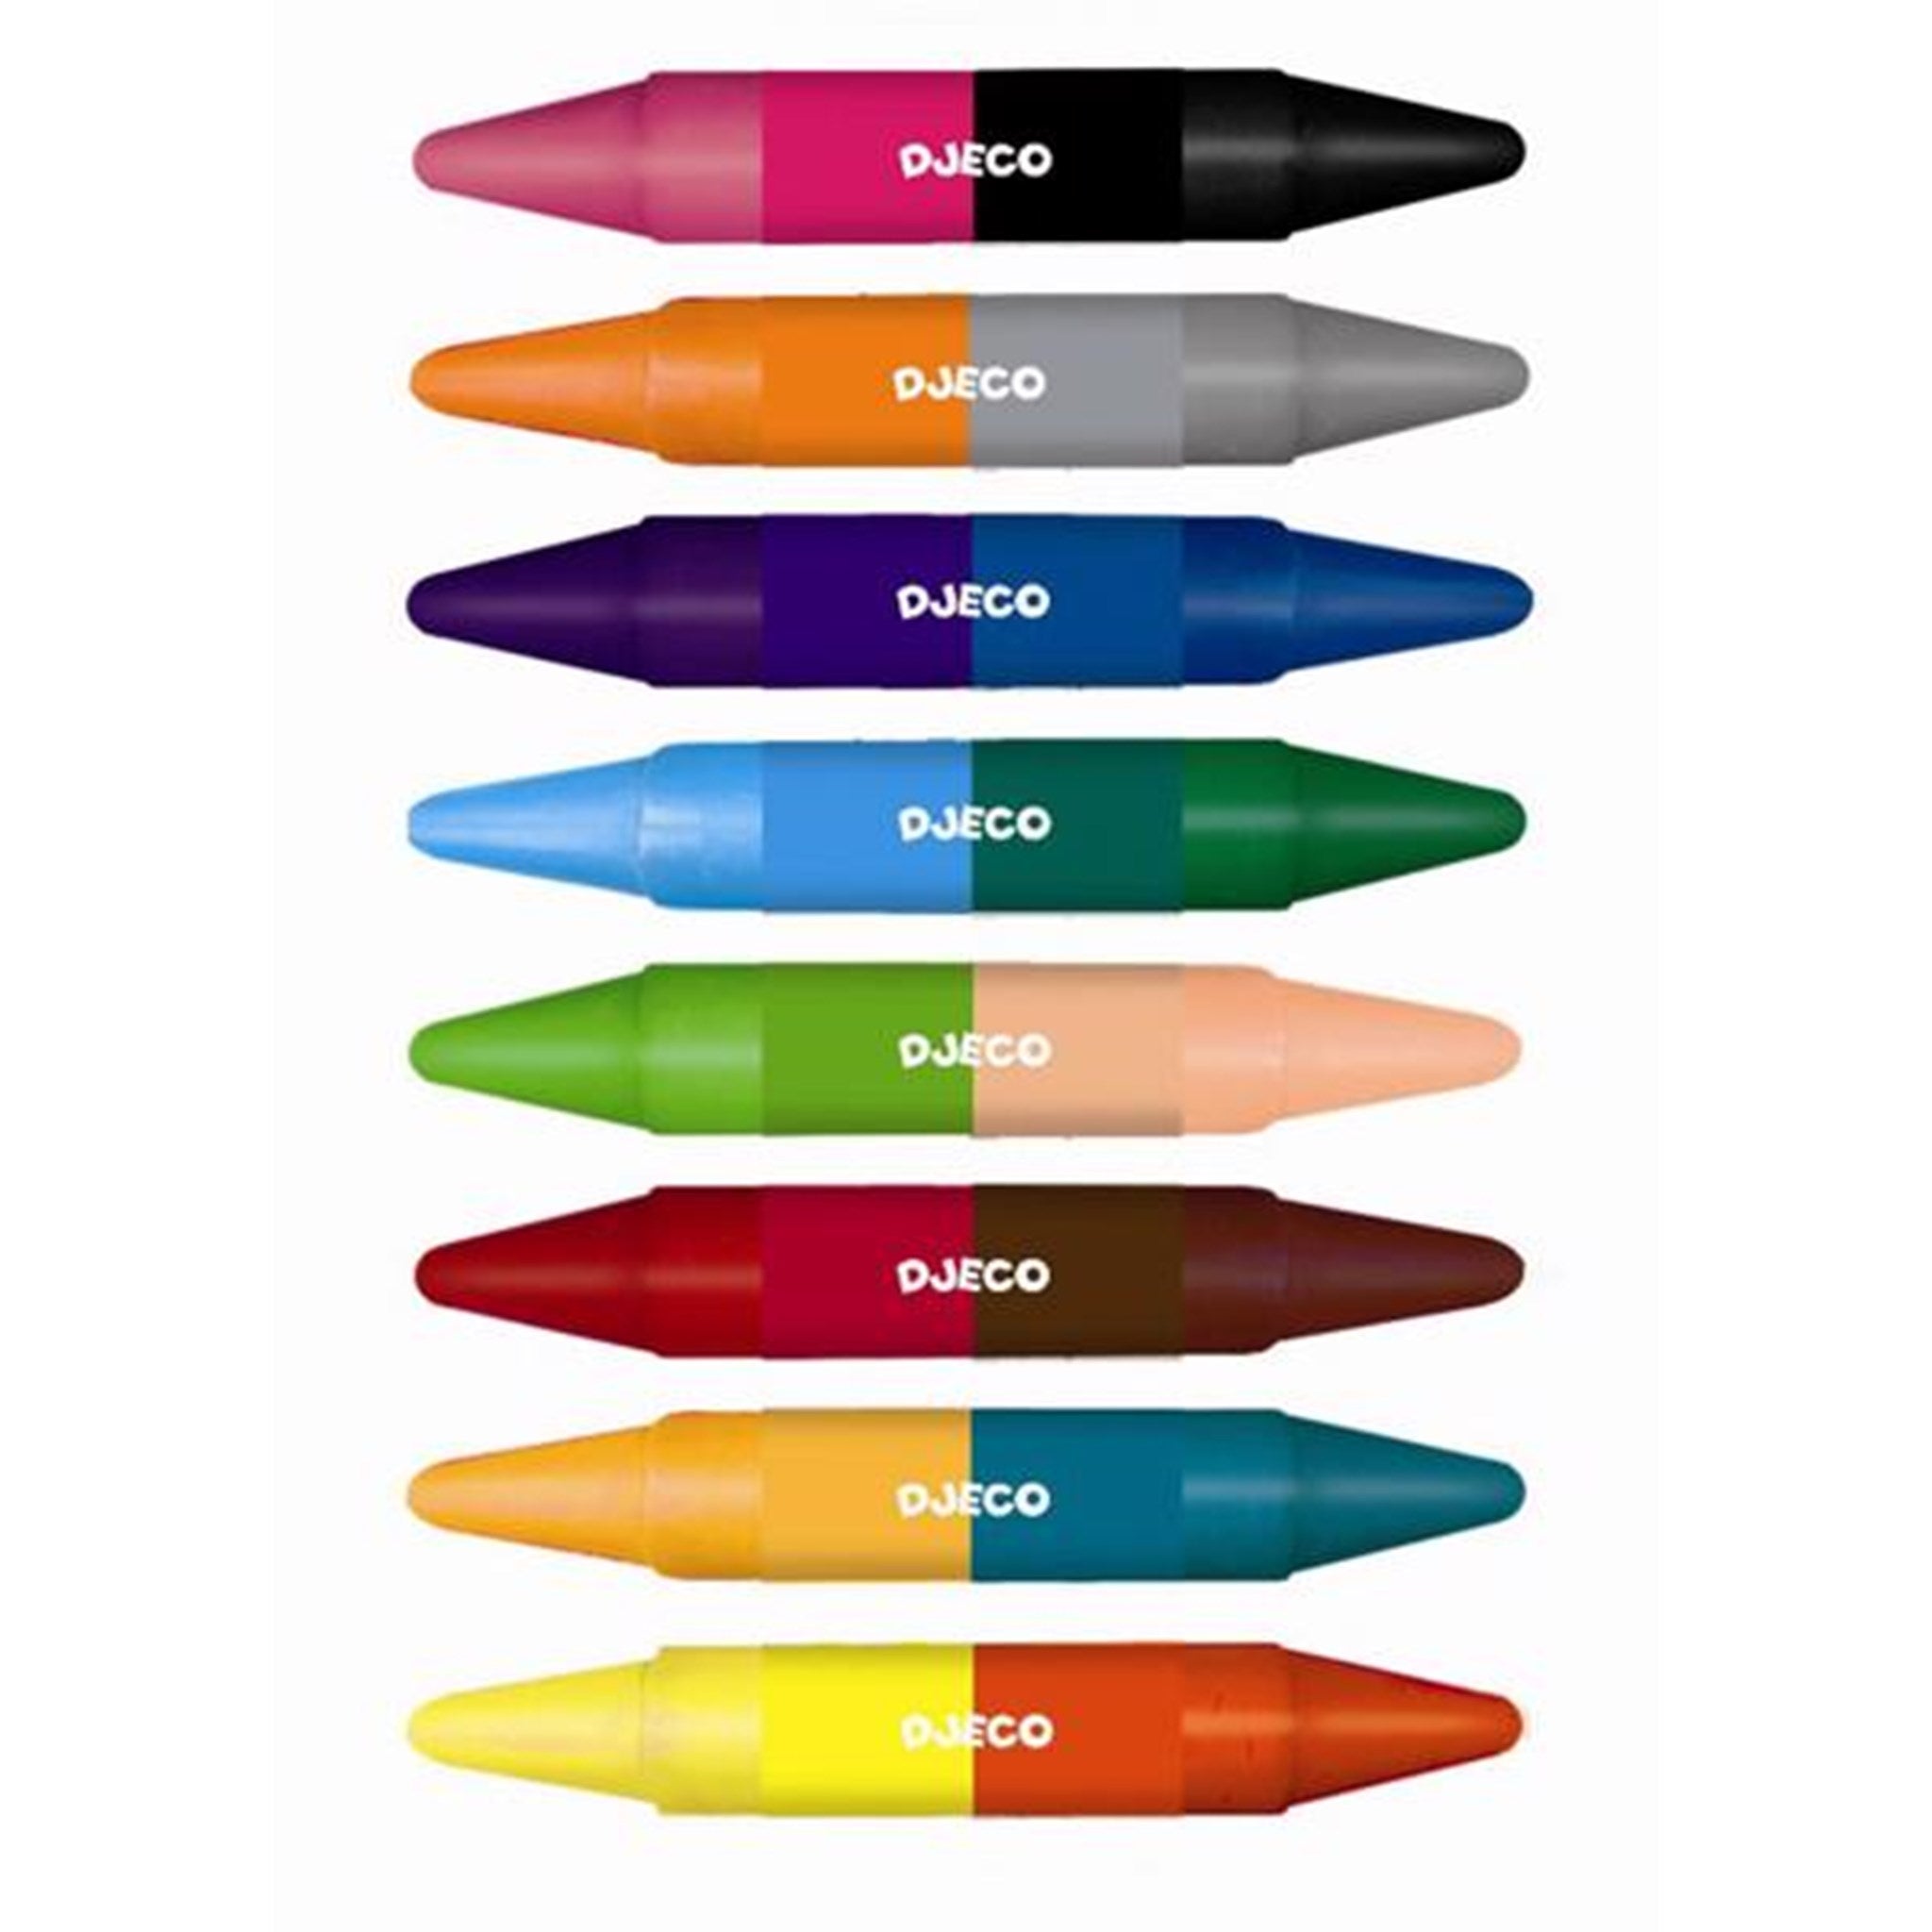 Djeco Crayons 16 Colours 2